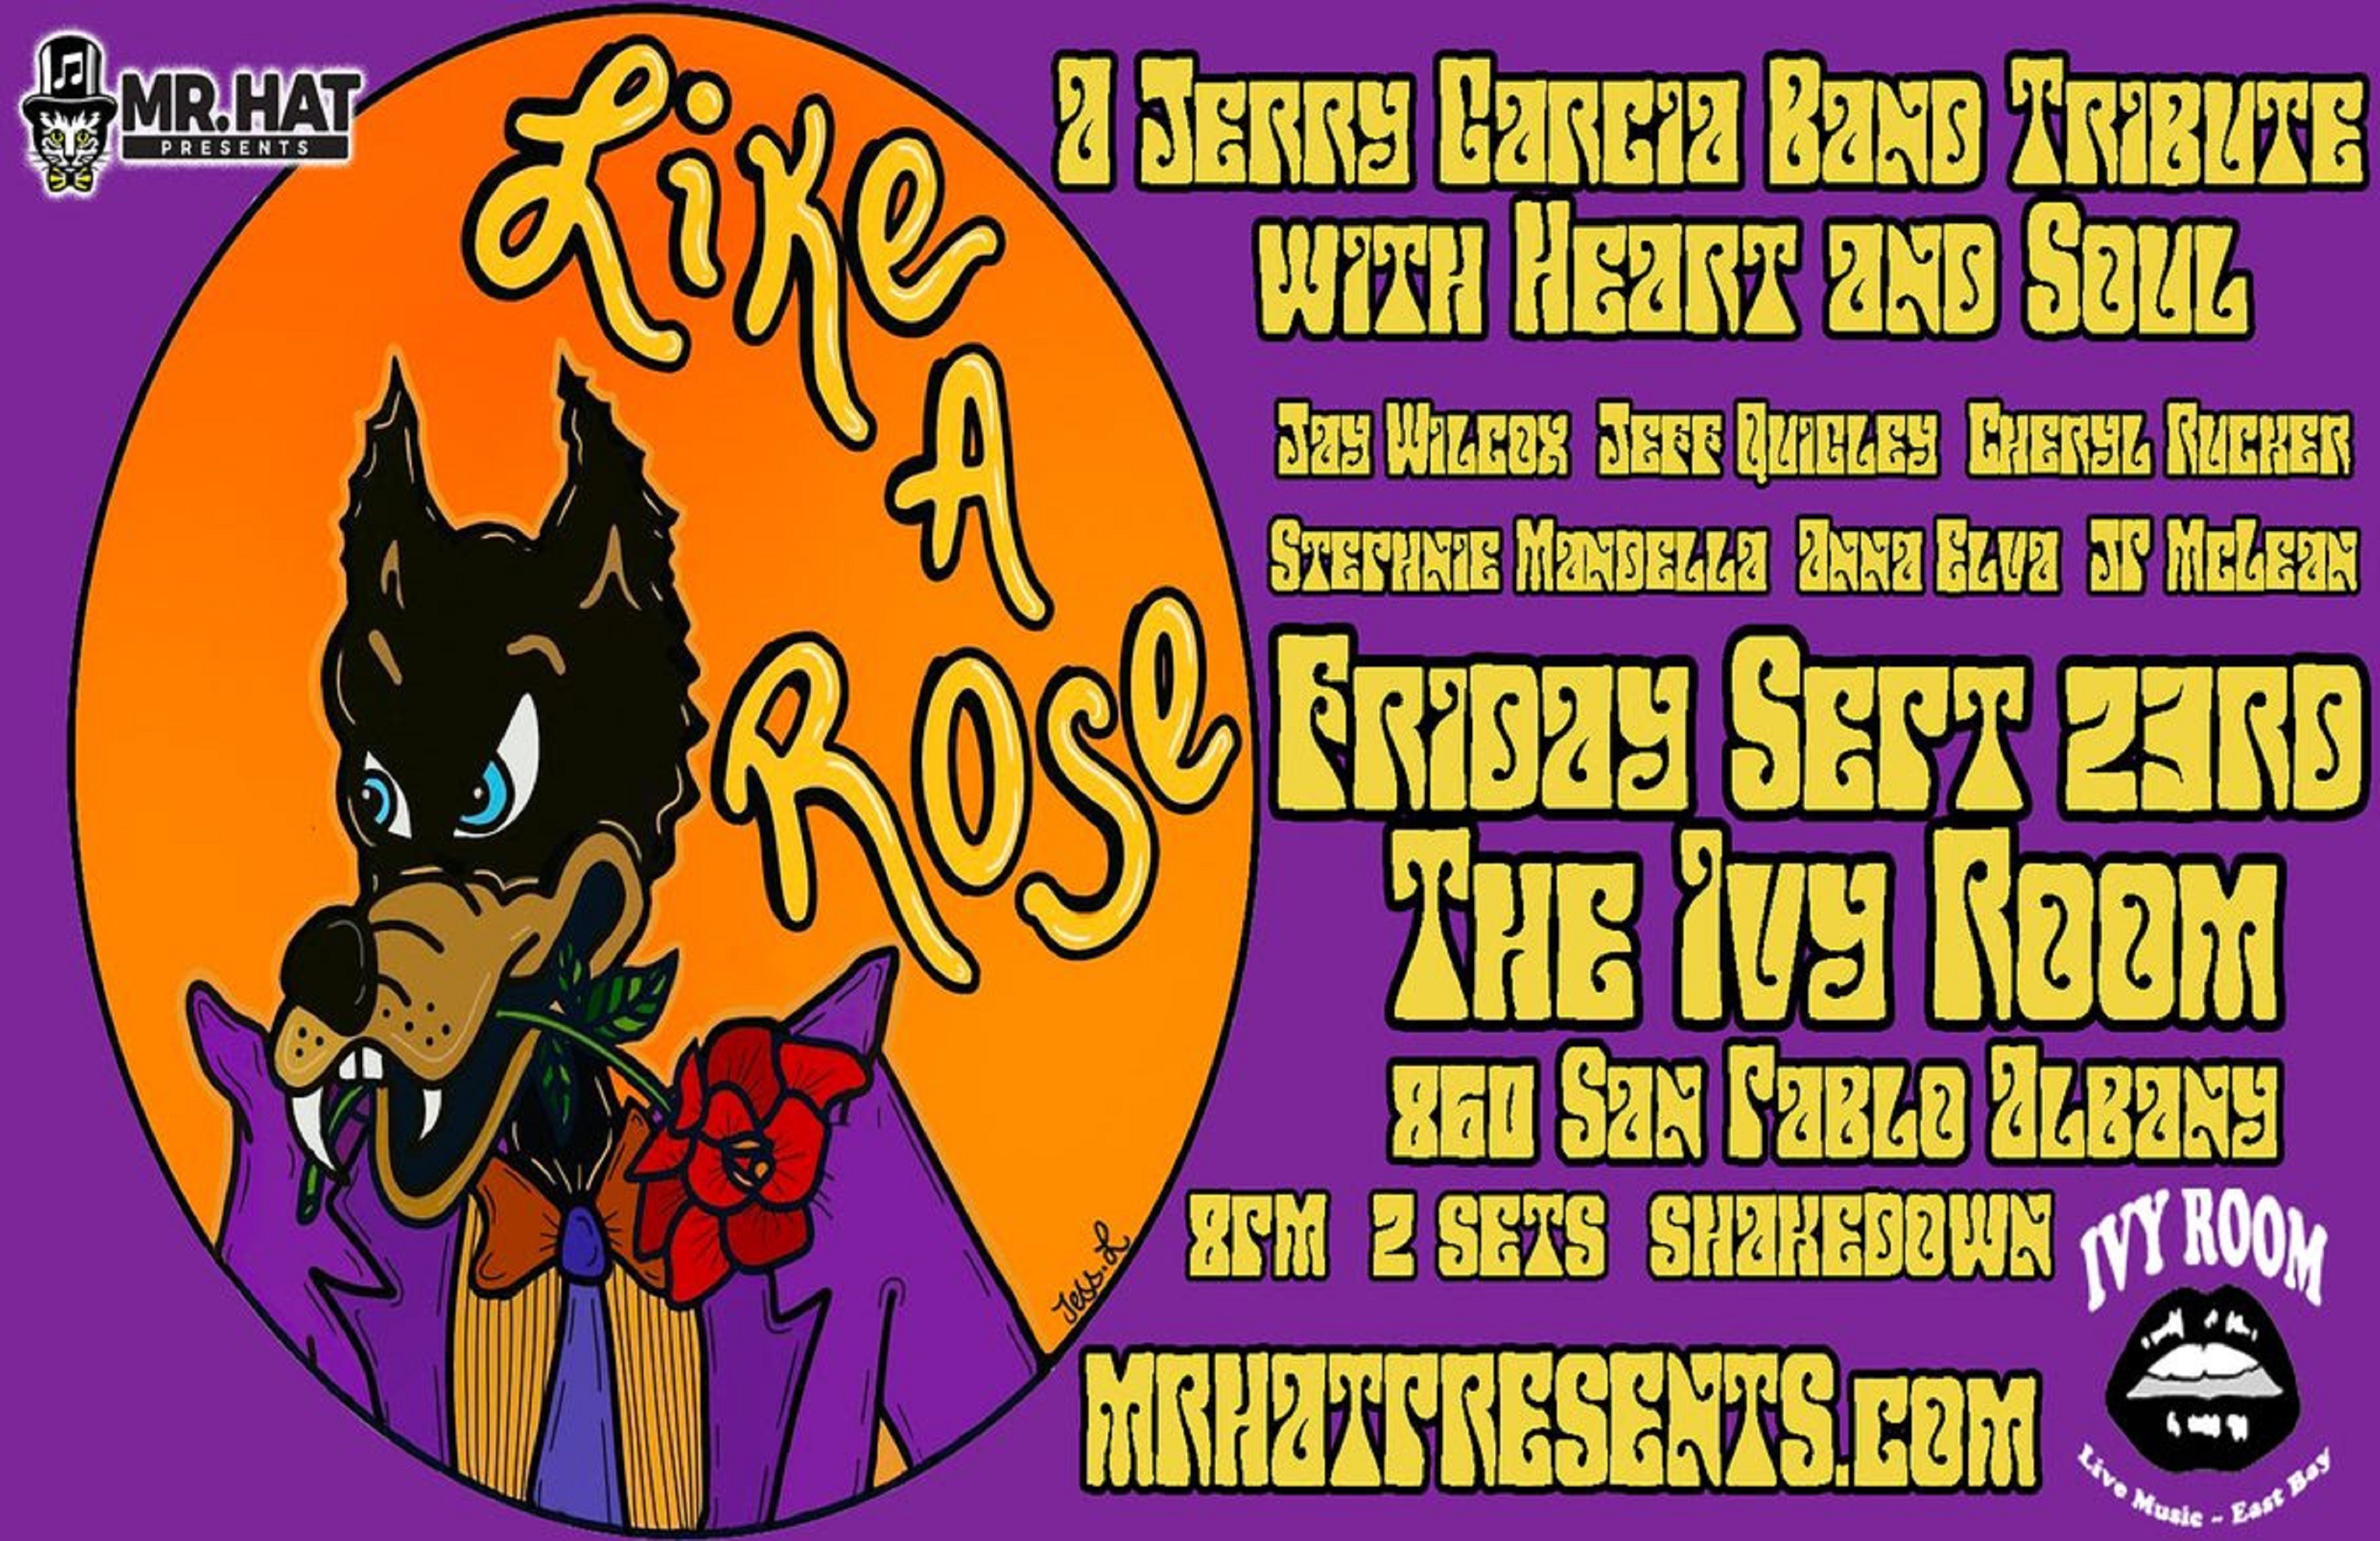 LIKE A ROSE JGB TRIBUTE PLAYS THE IVY ROOM FRIDAY 9/23